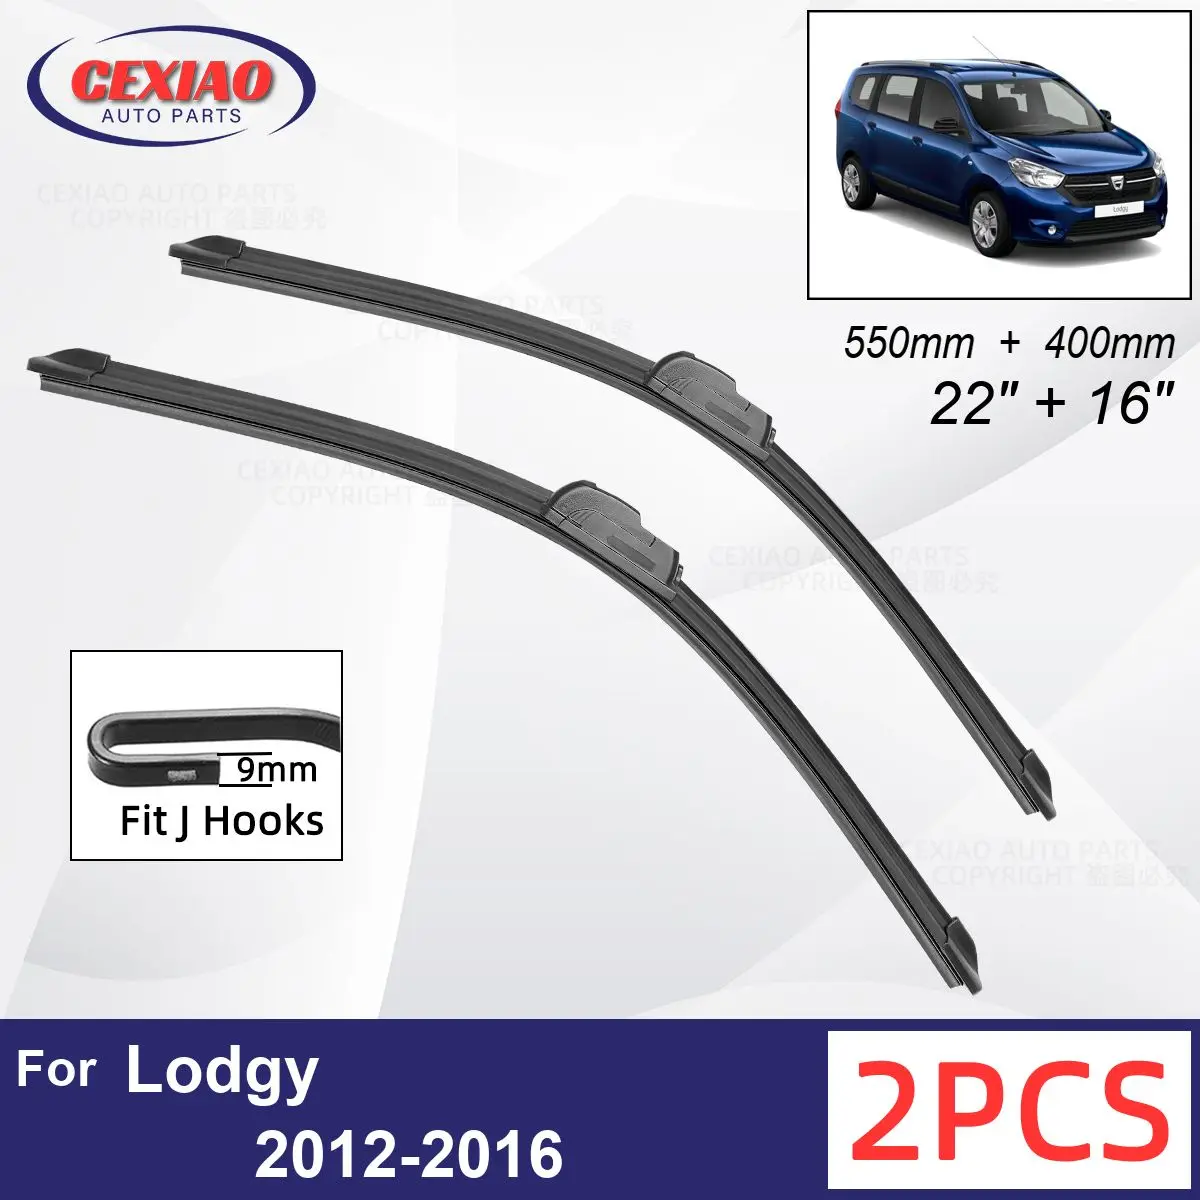 

Car Wiper For Dacia Renault Lodgy 2012-2016 Front Wiper Blades Soft Rubber Windscreen Wipers Auto Windshield 22" 16" 550mm 400mm